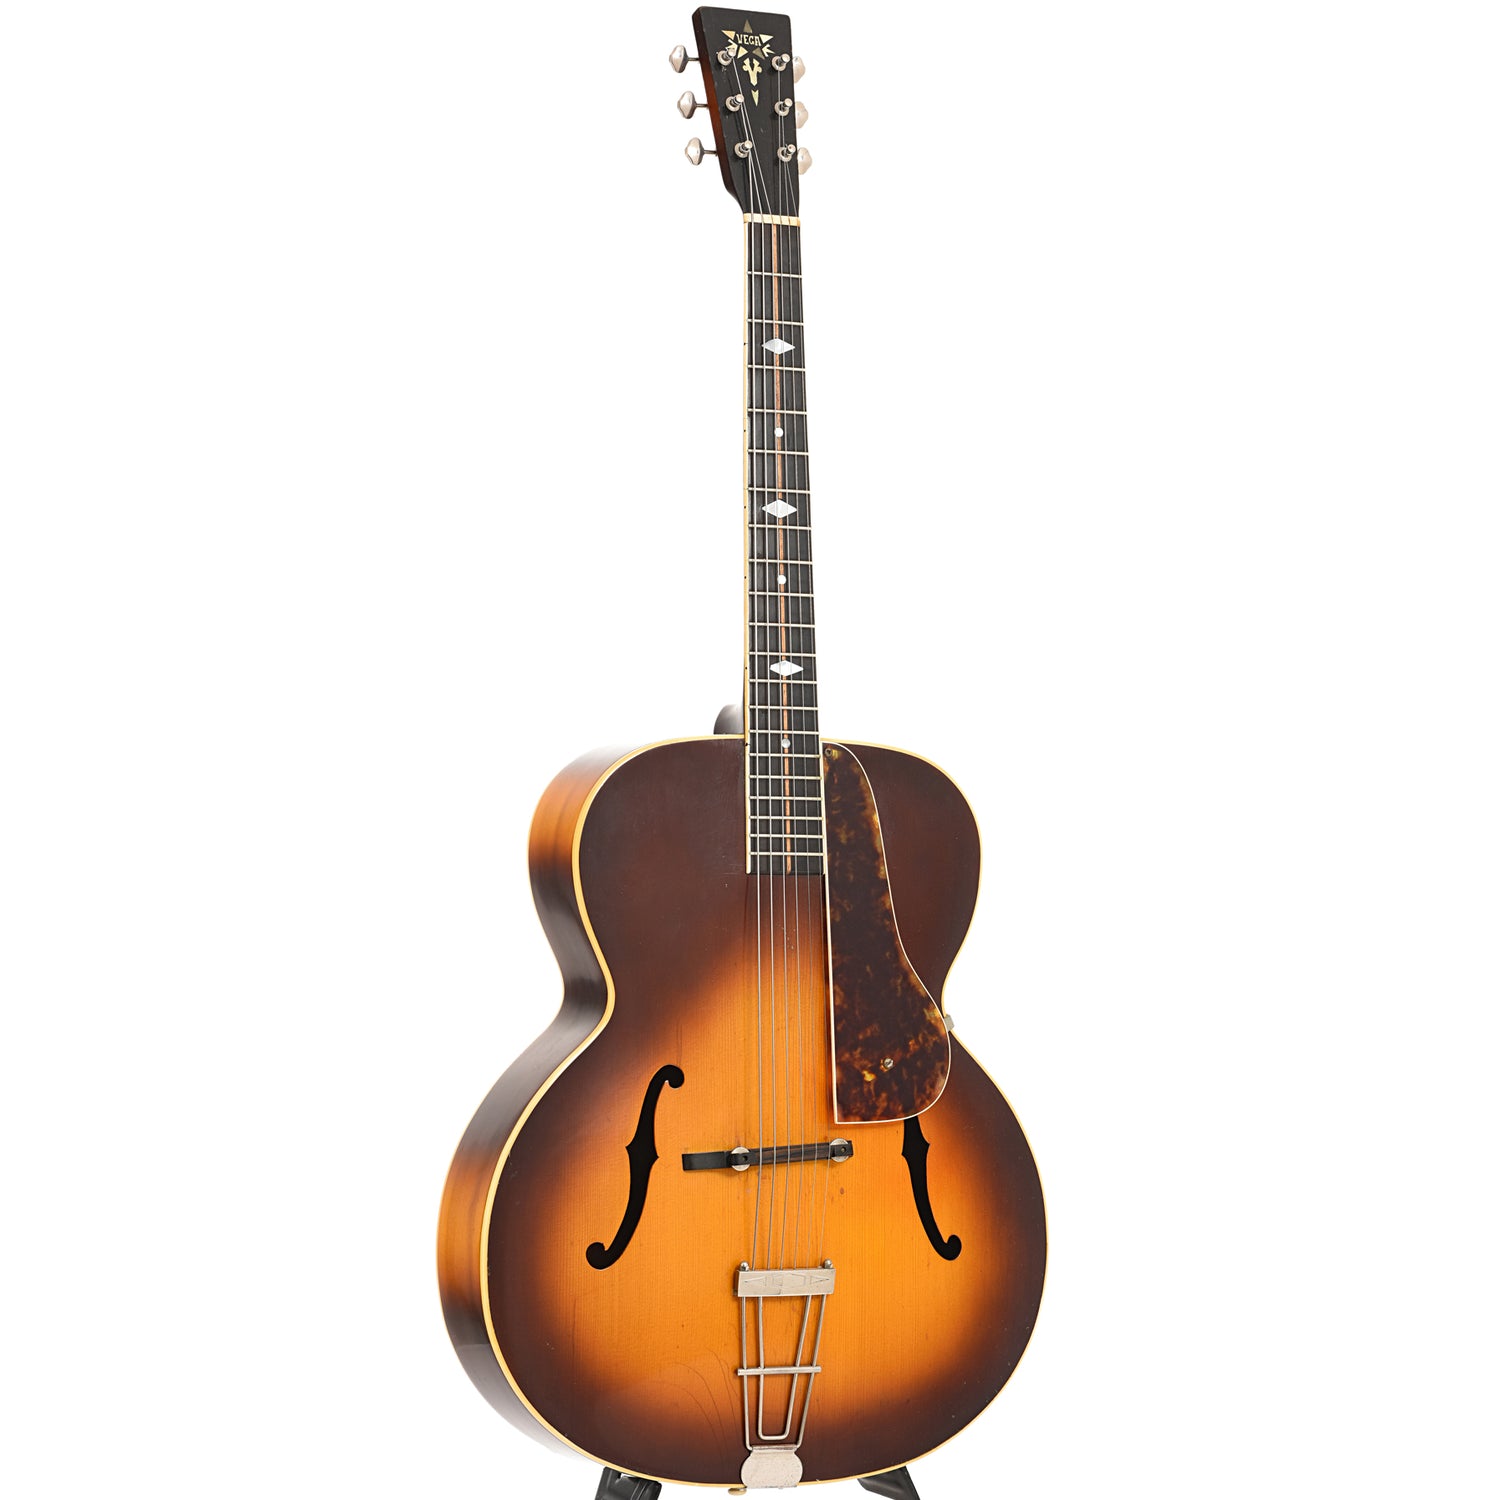 Full front and side of Vega C Series Archtop